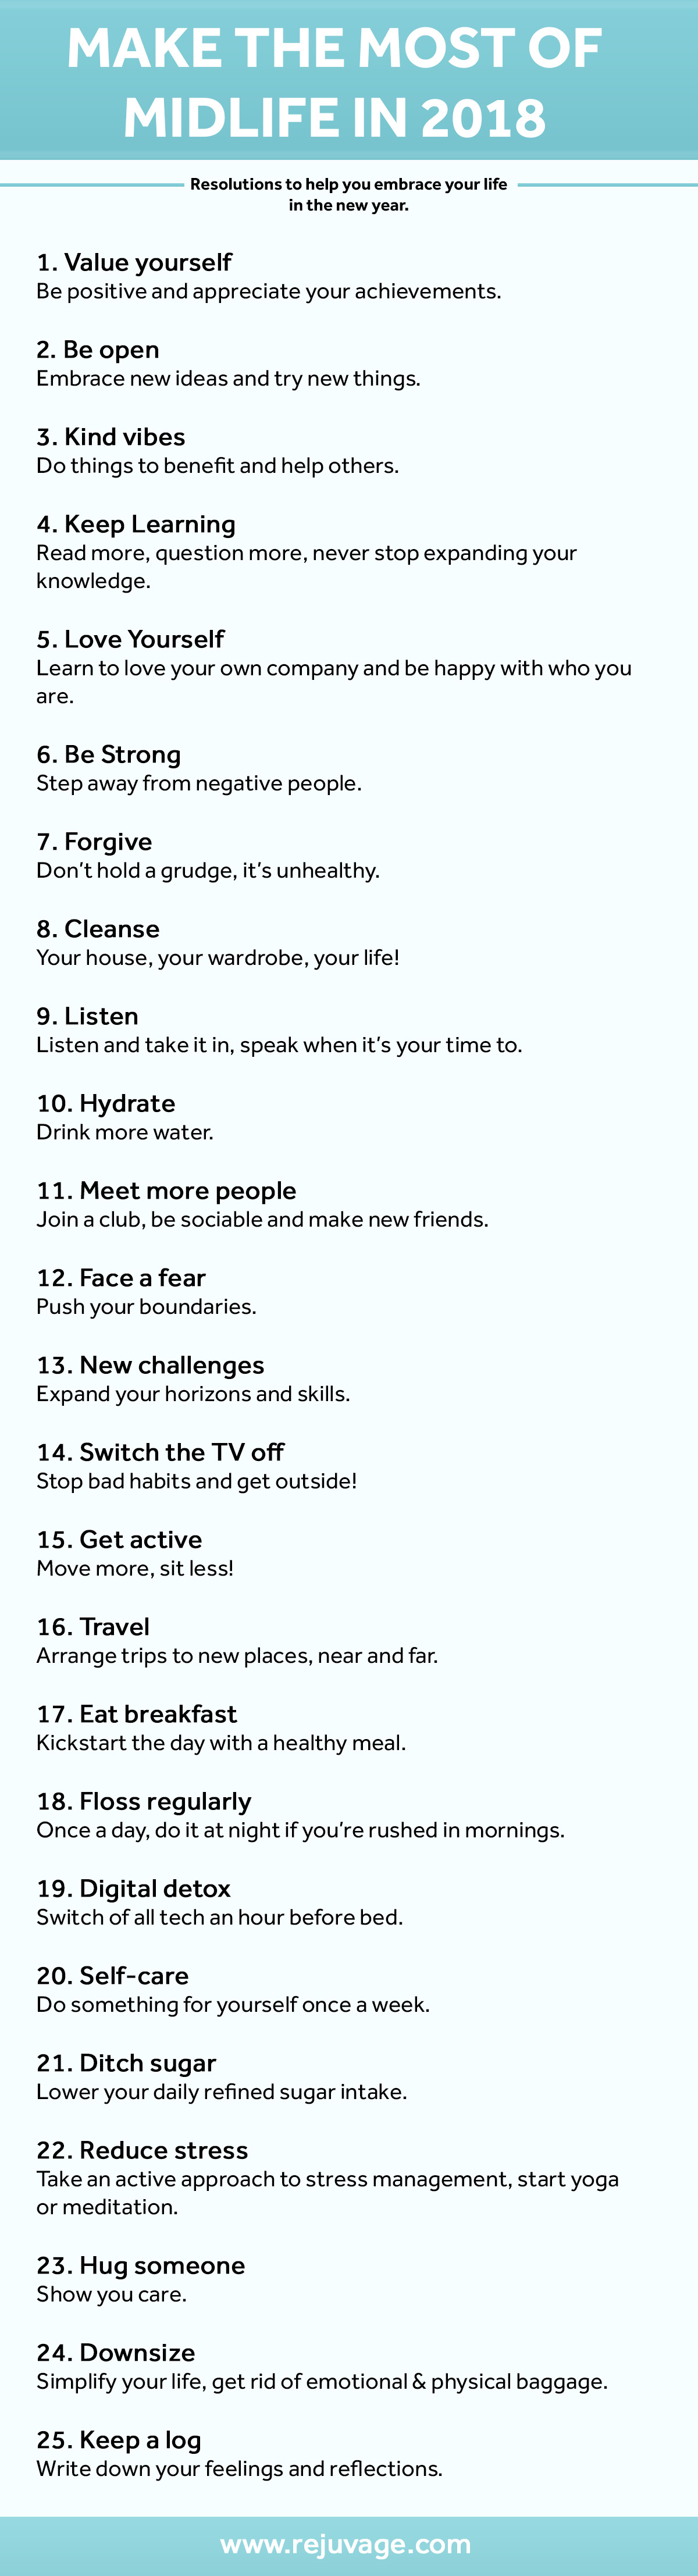 An infographic acalled, make the most of 2018 with a list of 25 positive mantras to follow for the new year.